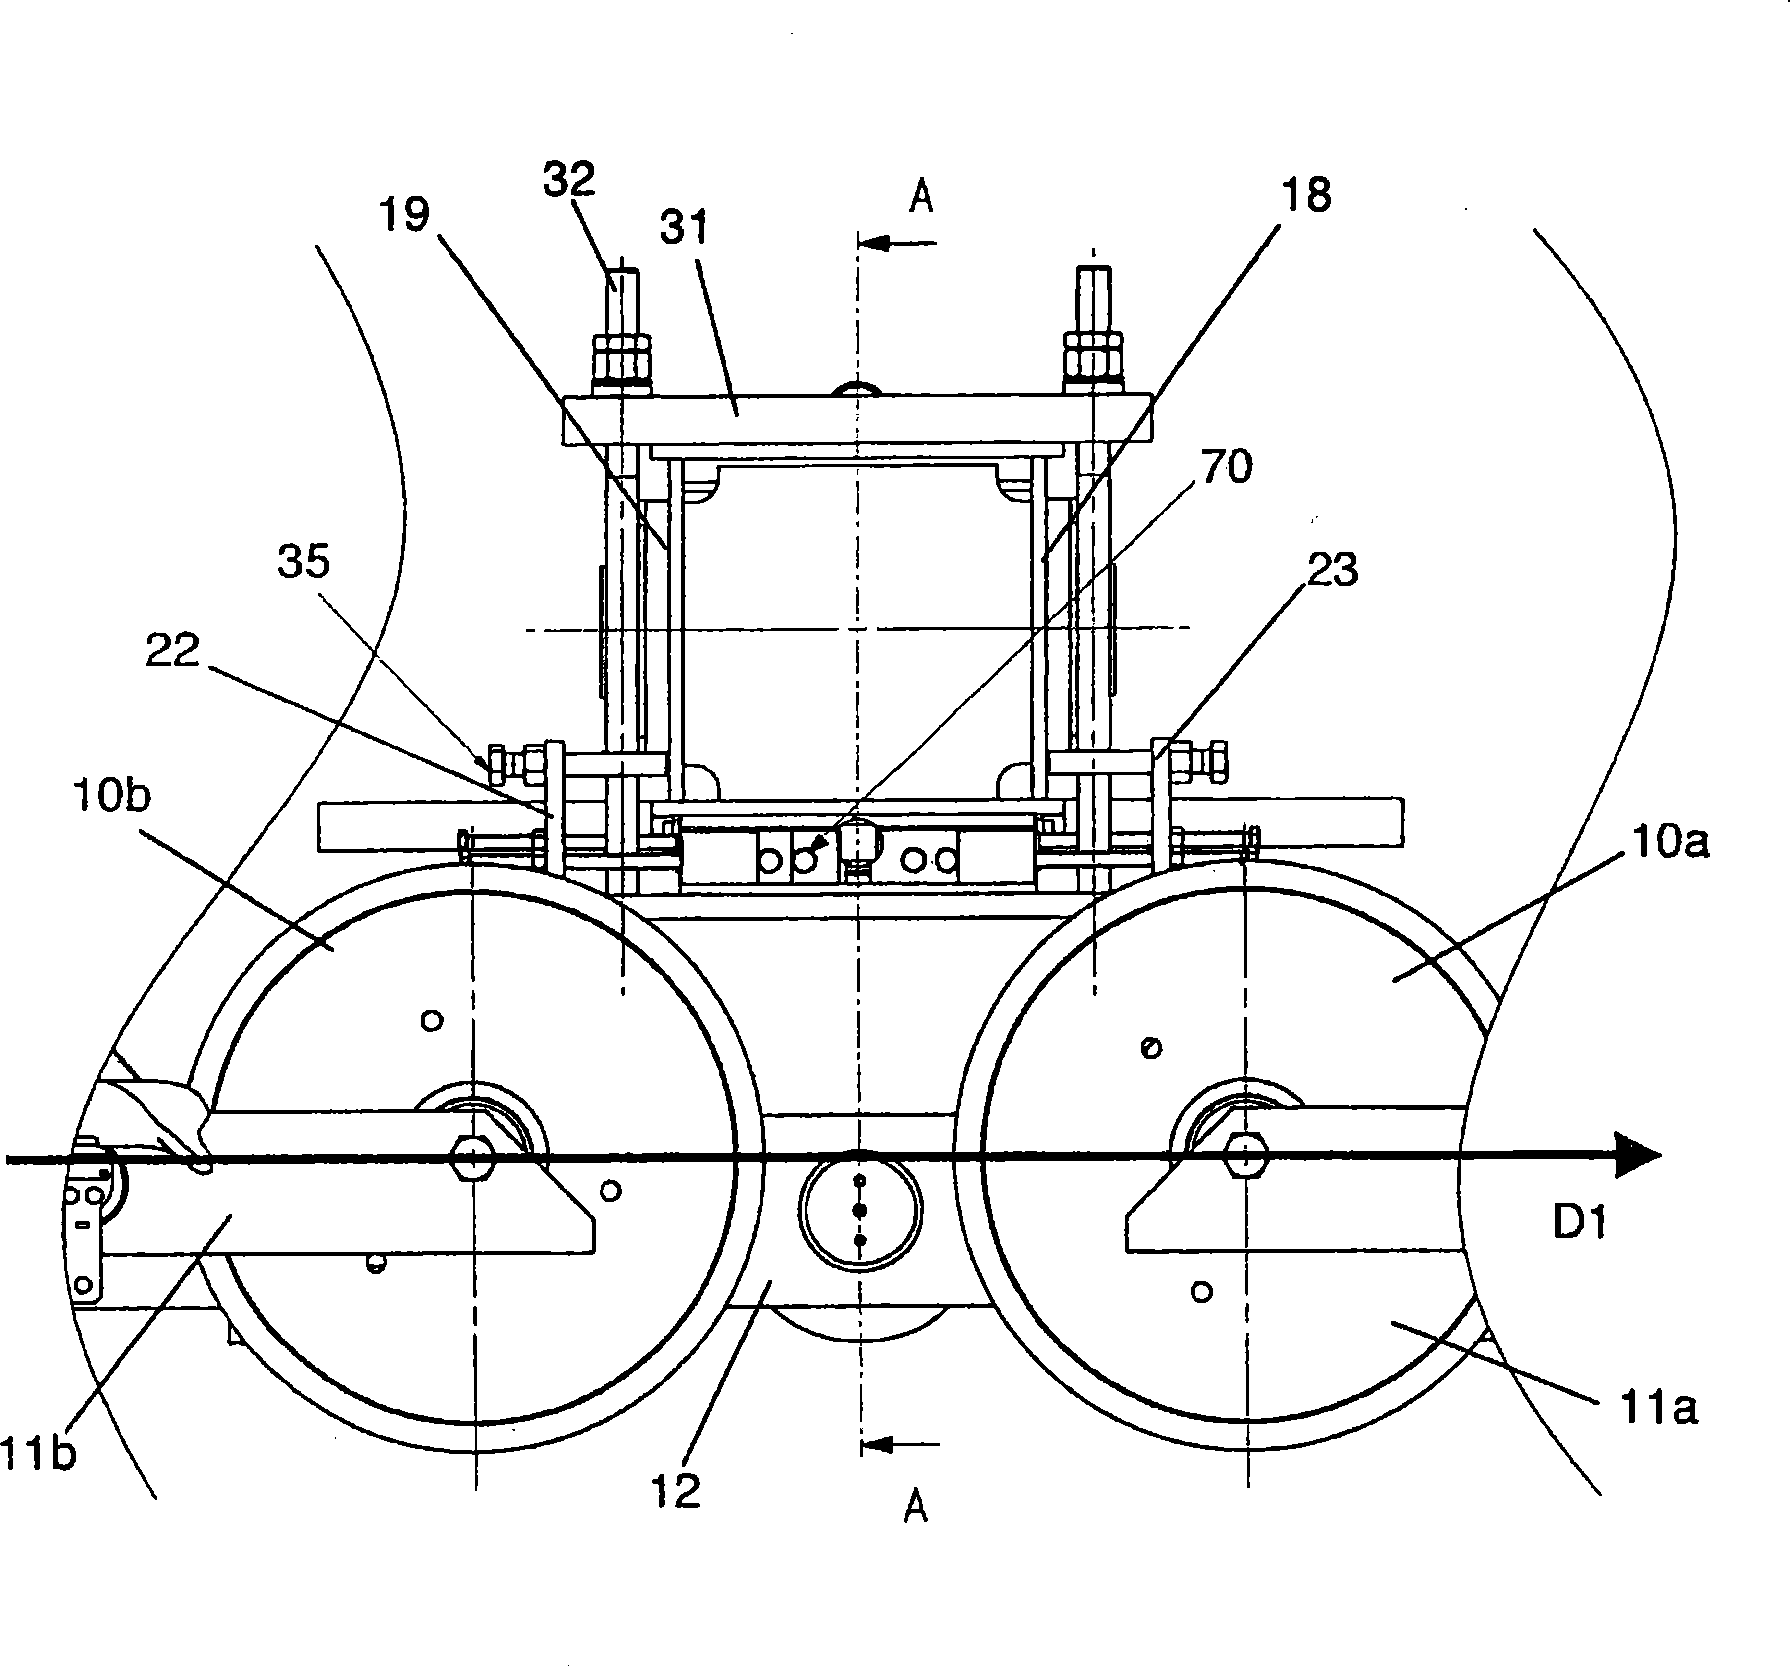 Mechanical device for adjusting a pulley array for supporting and guiding an overhead cable of a mechanical ascending system